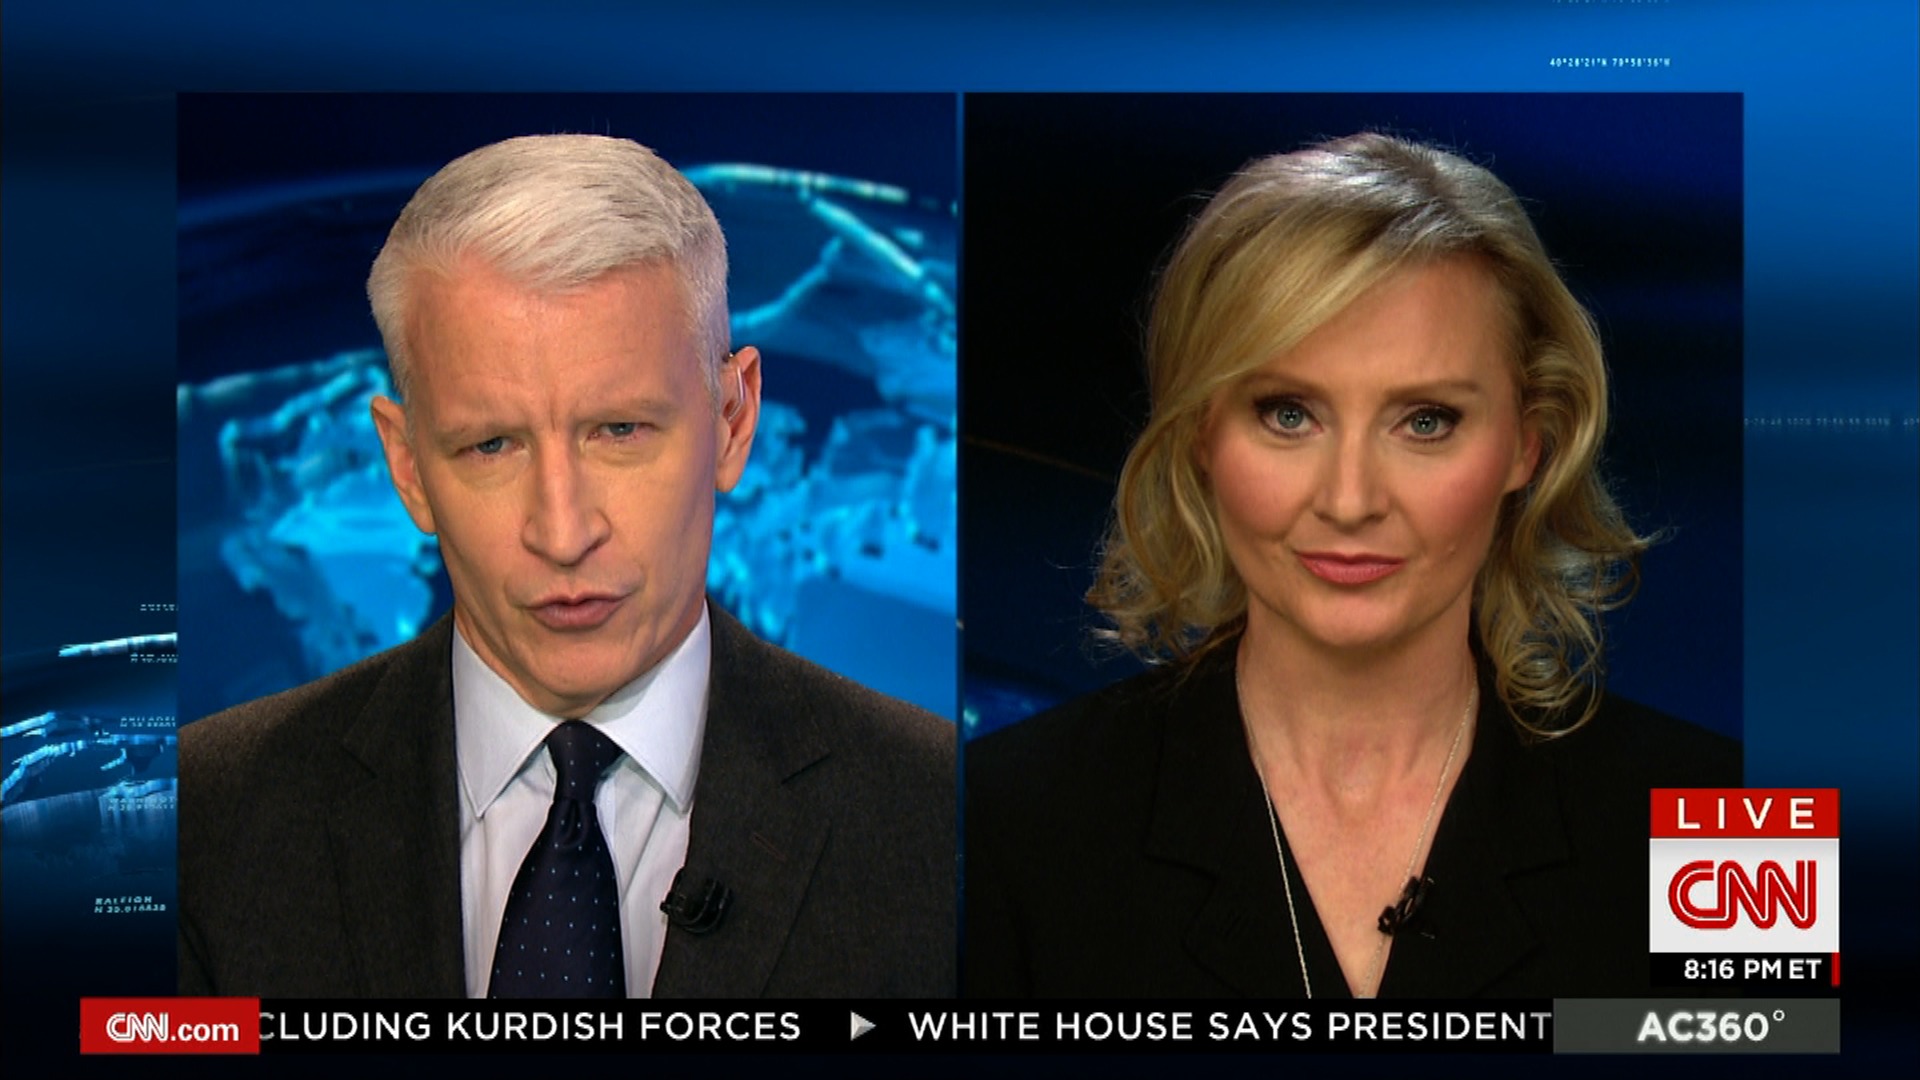 Correspondent Alex Quade live on CNN's AC360 show with anchor Anderson Cooper.